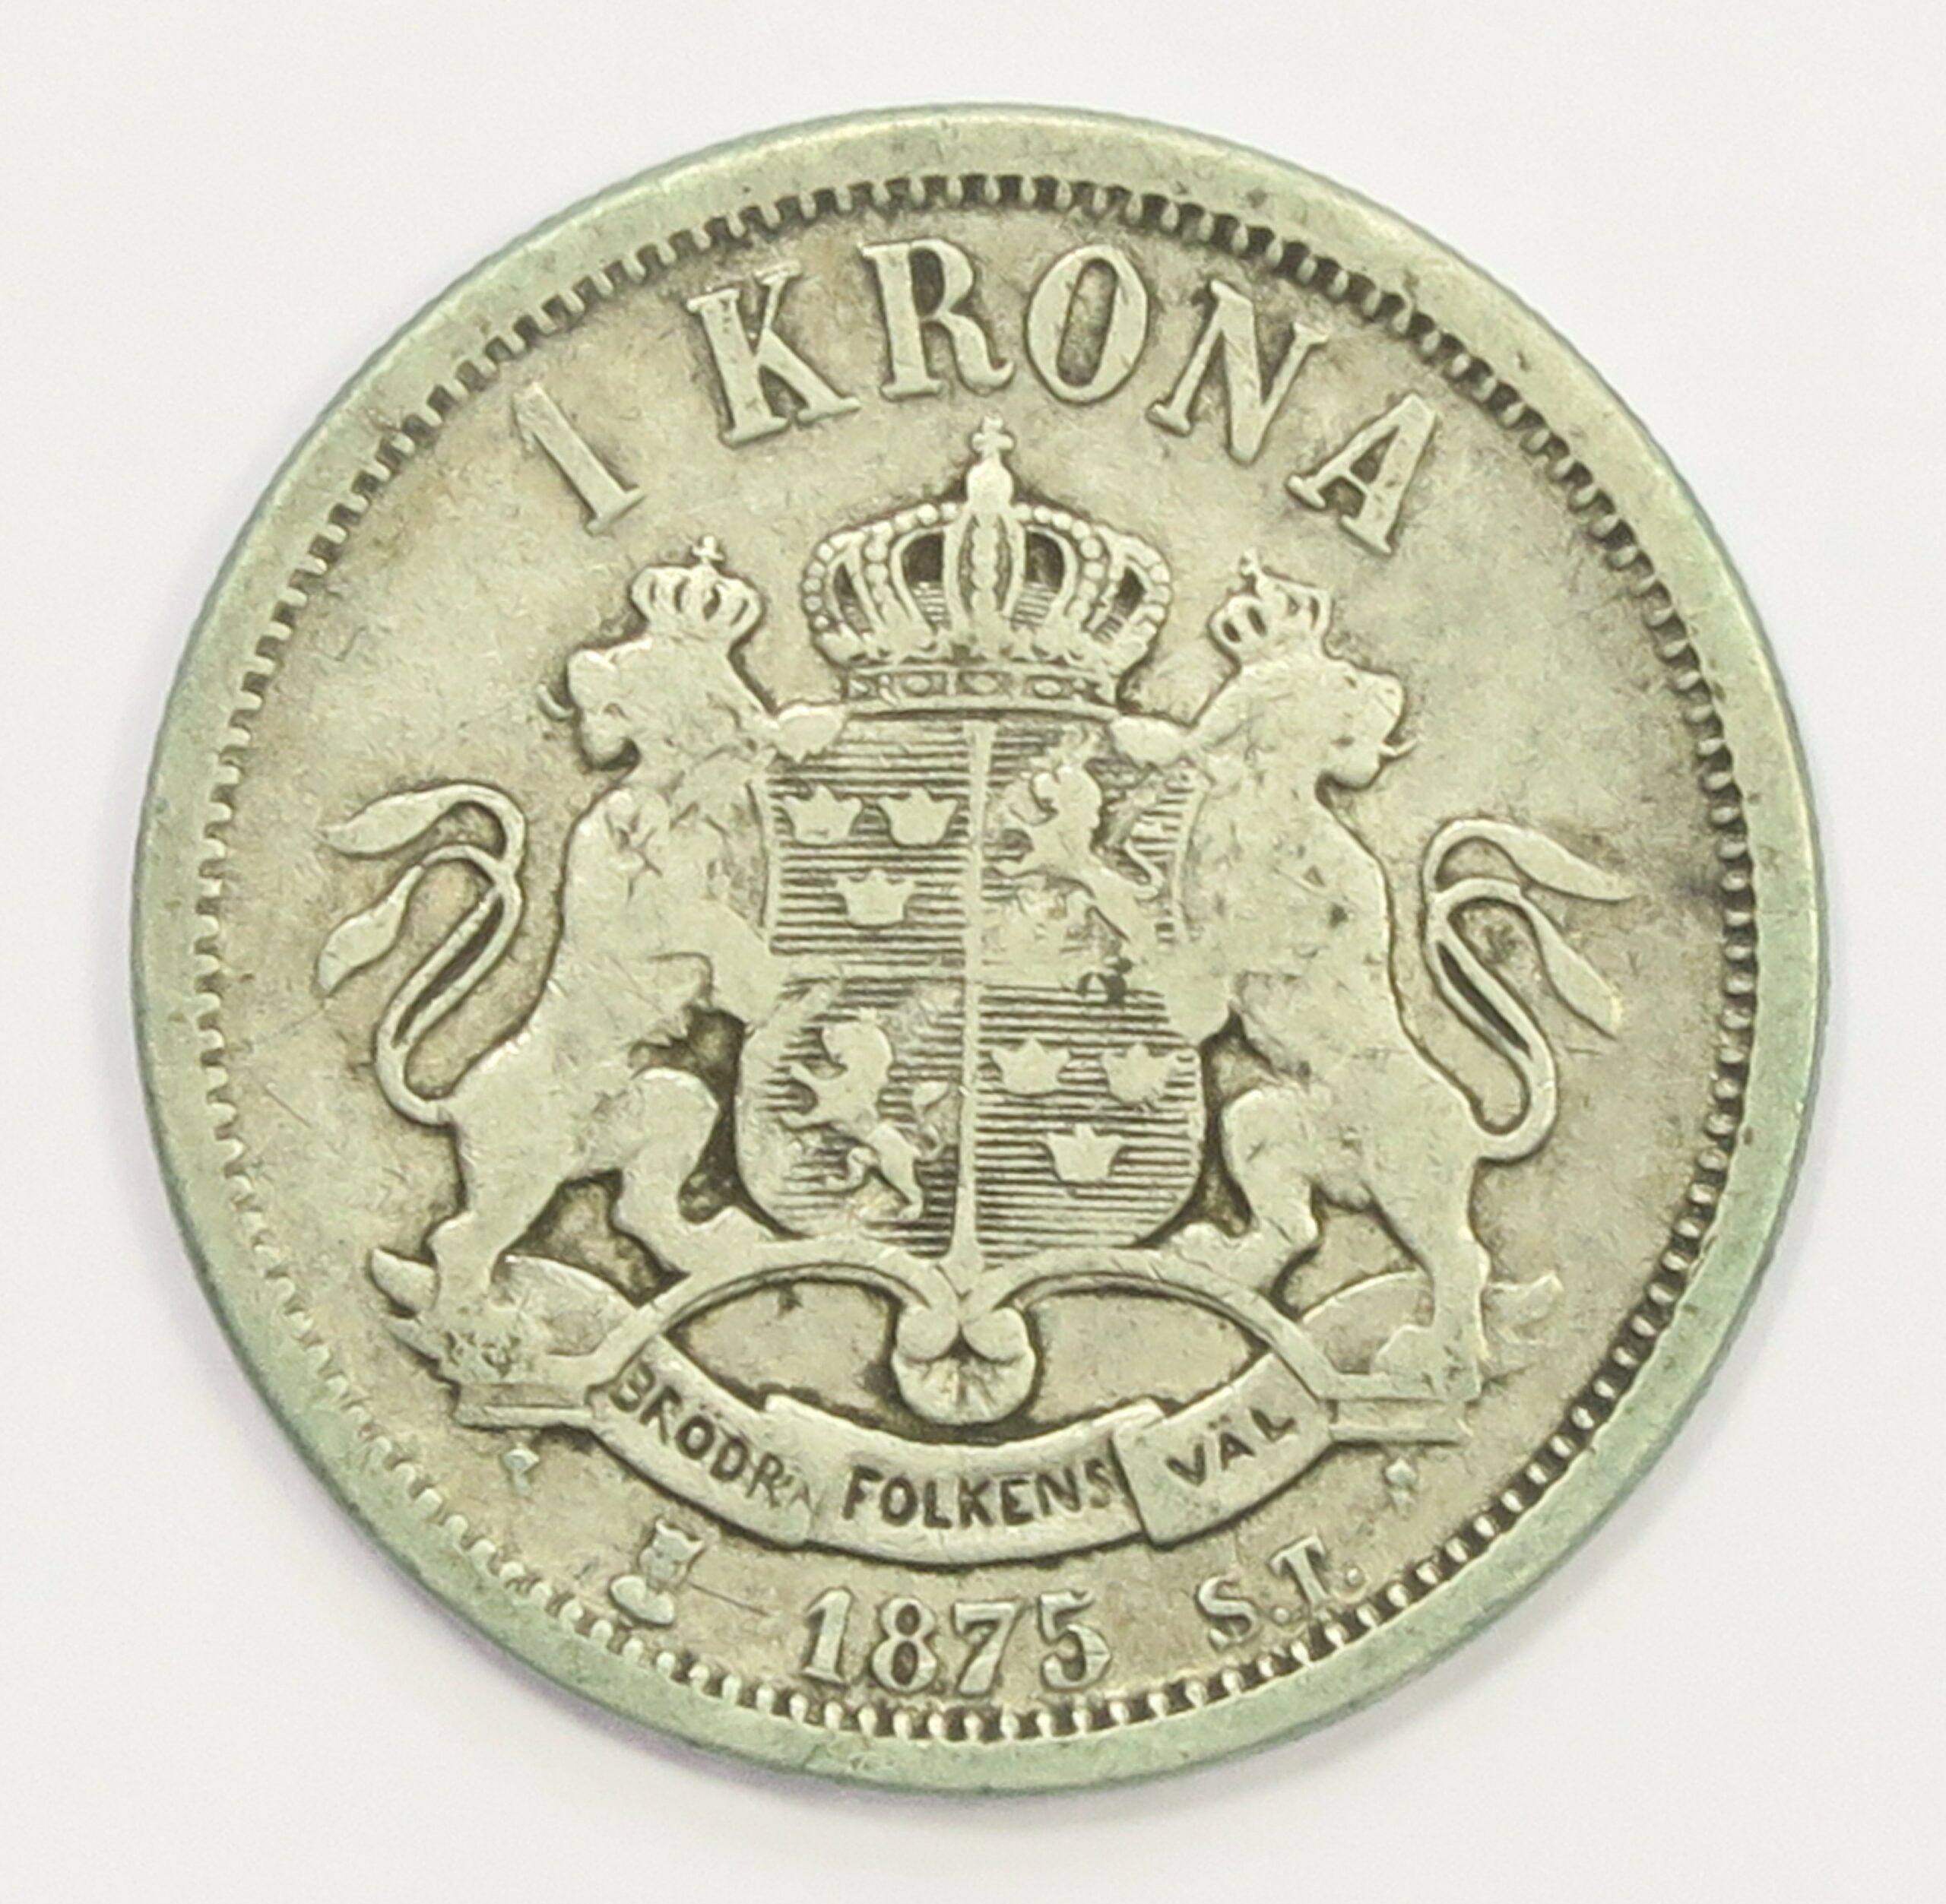 Sweden Krona 1875 - colonialcollectables buying and selling coins ...